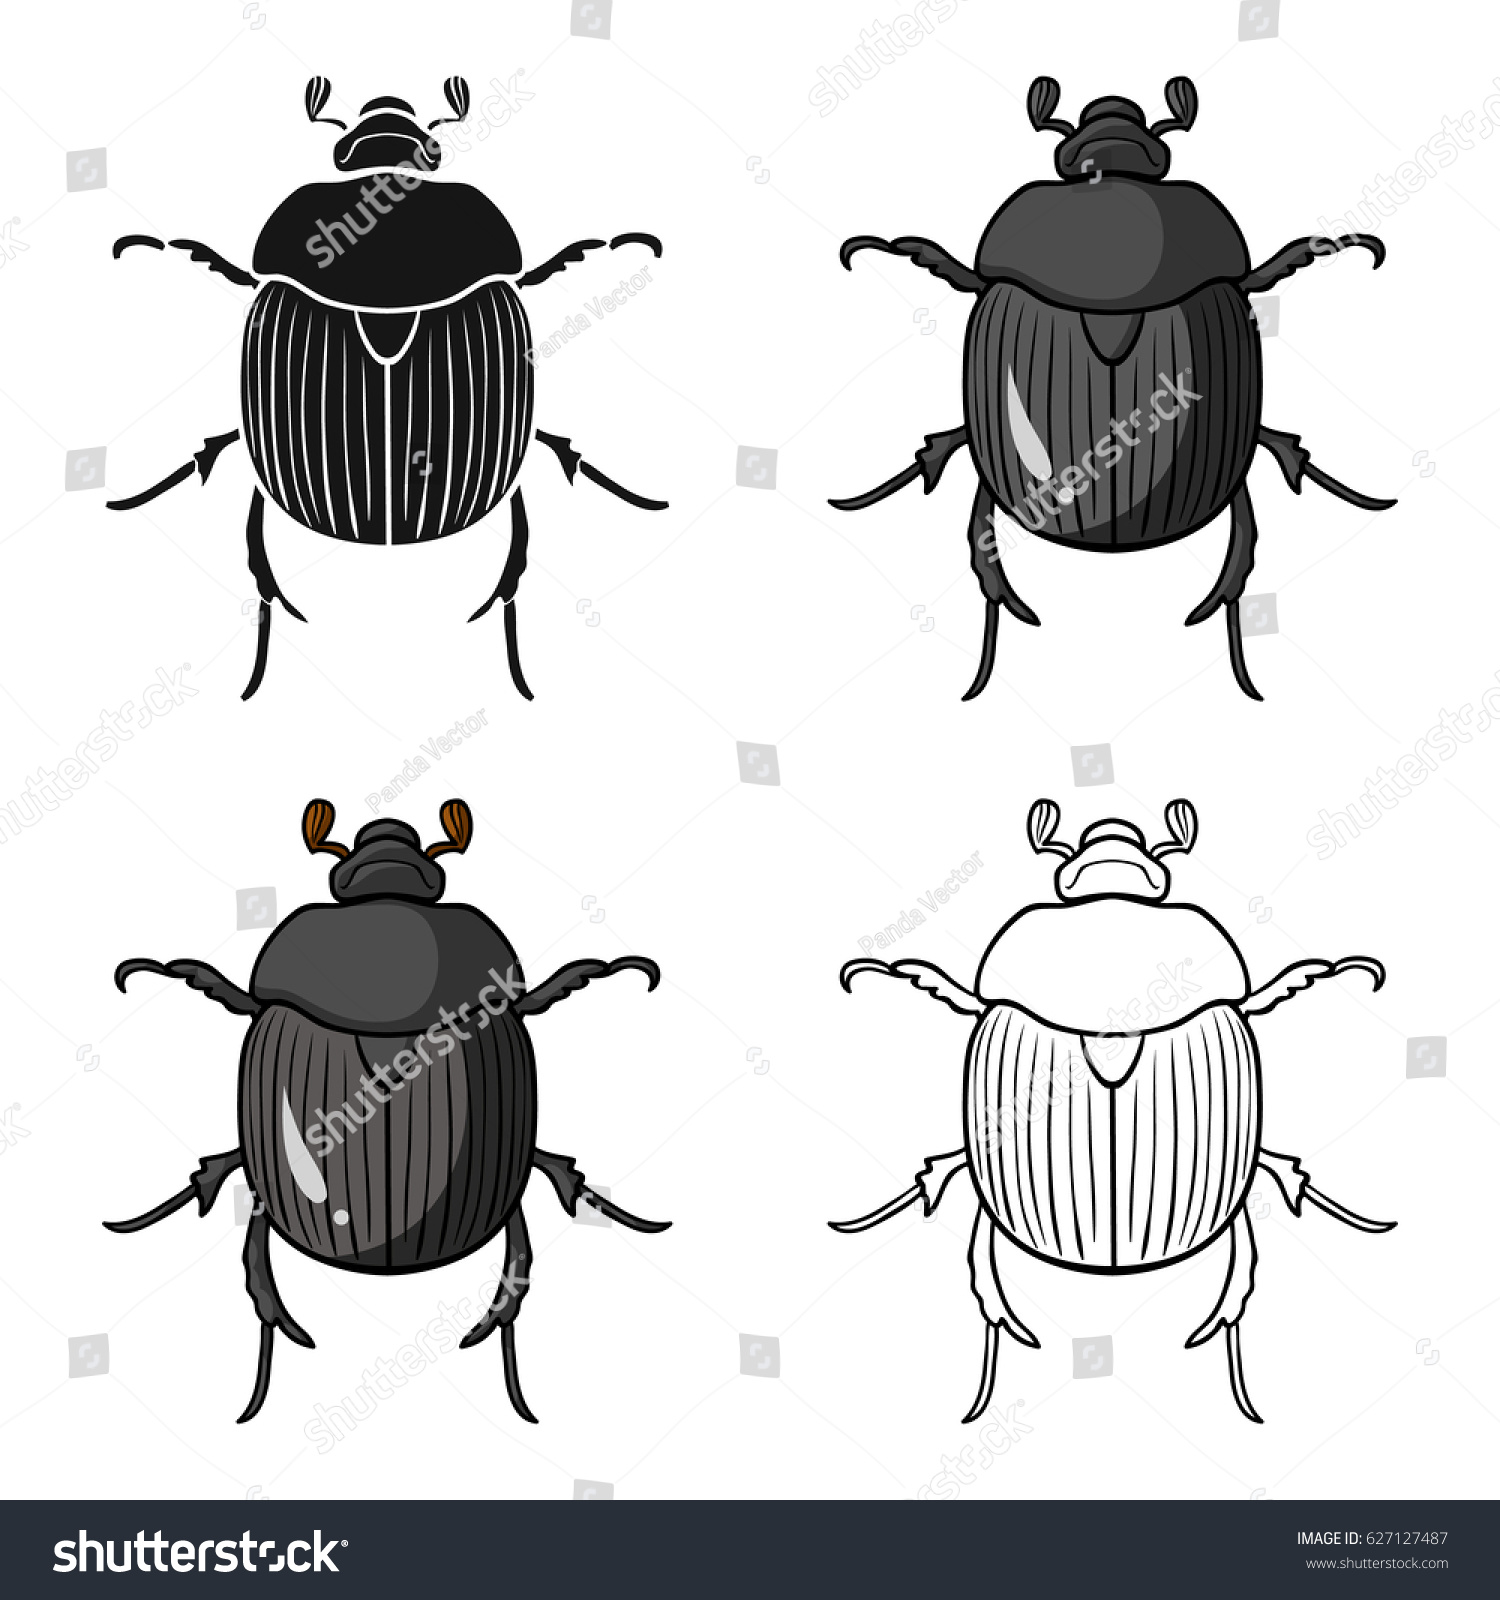 SVG of Dor-beetle icon in cartoon style isolated on white background. Insects symbol stock vector illustration. svg